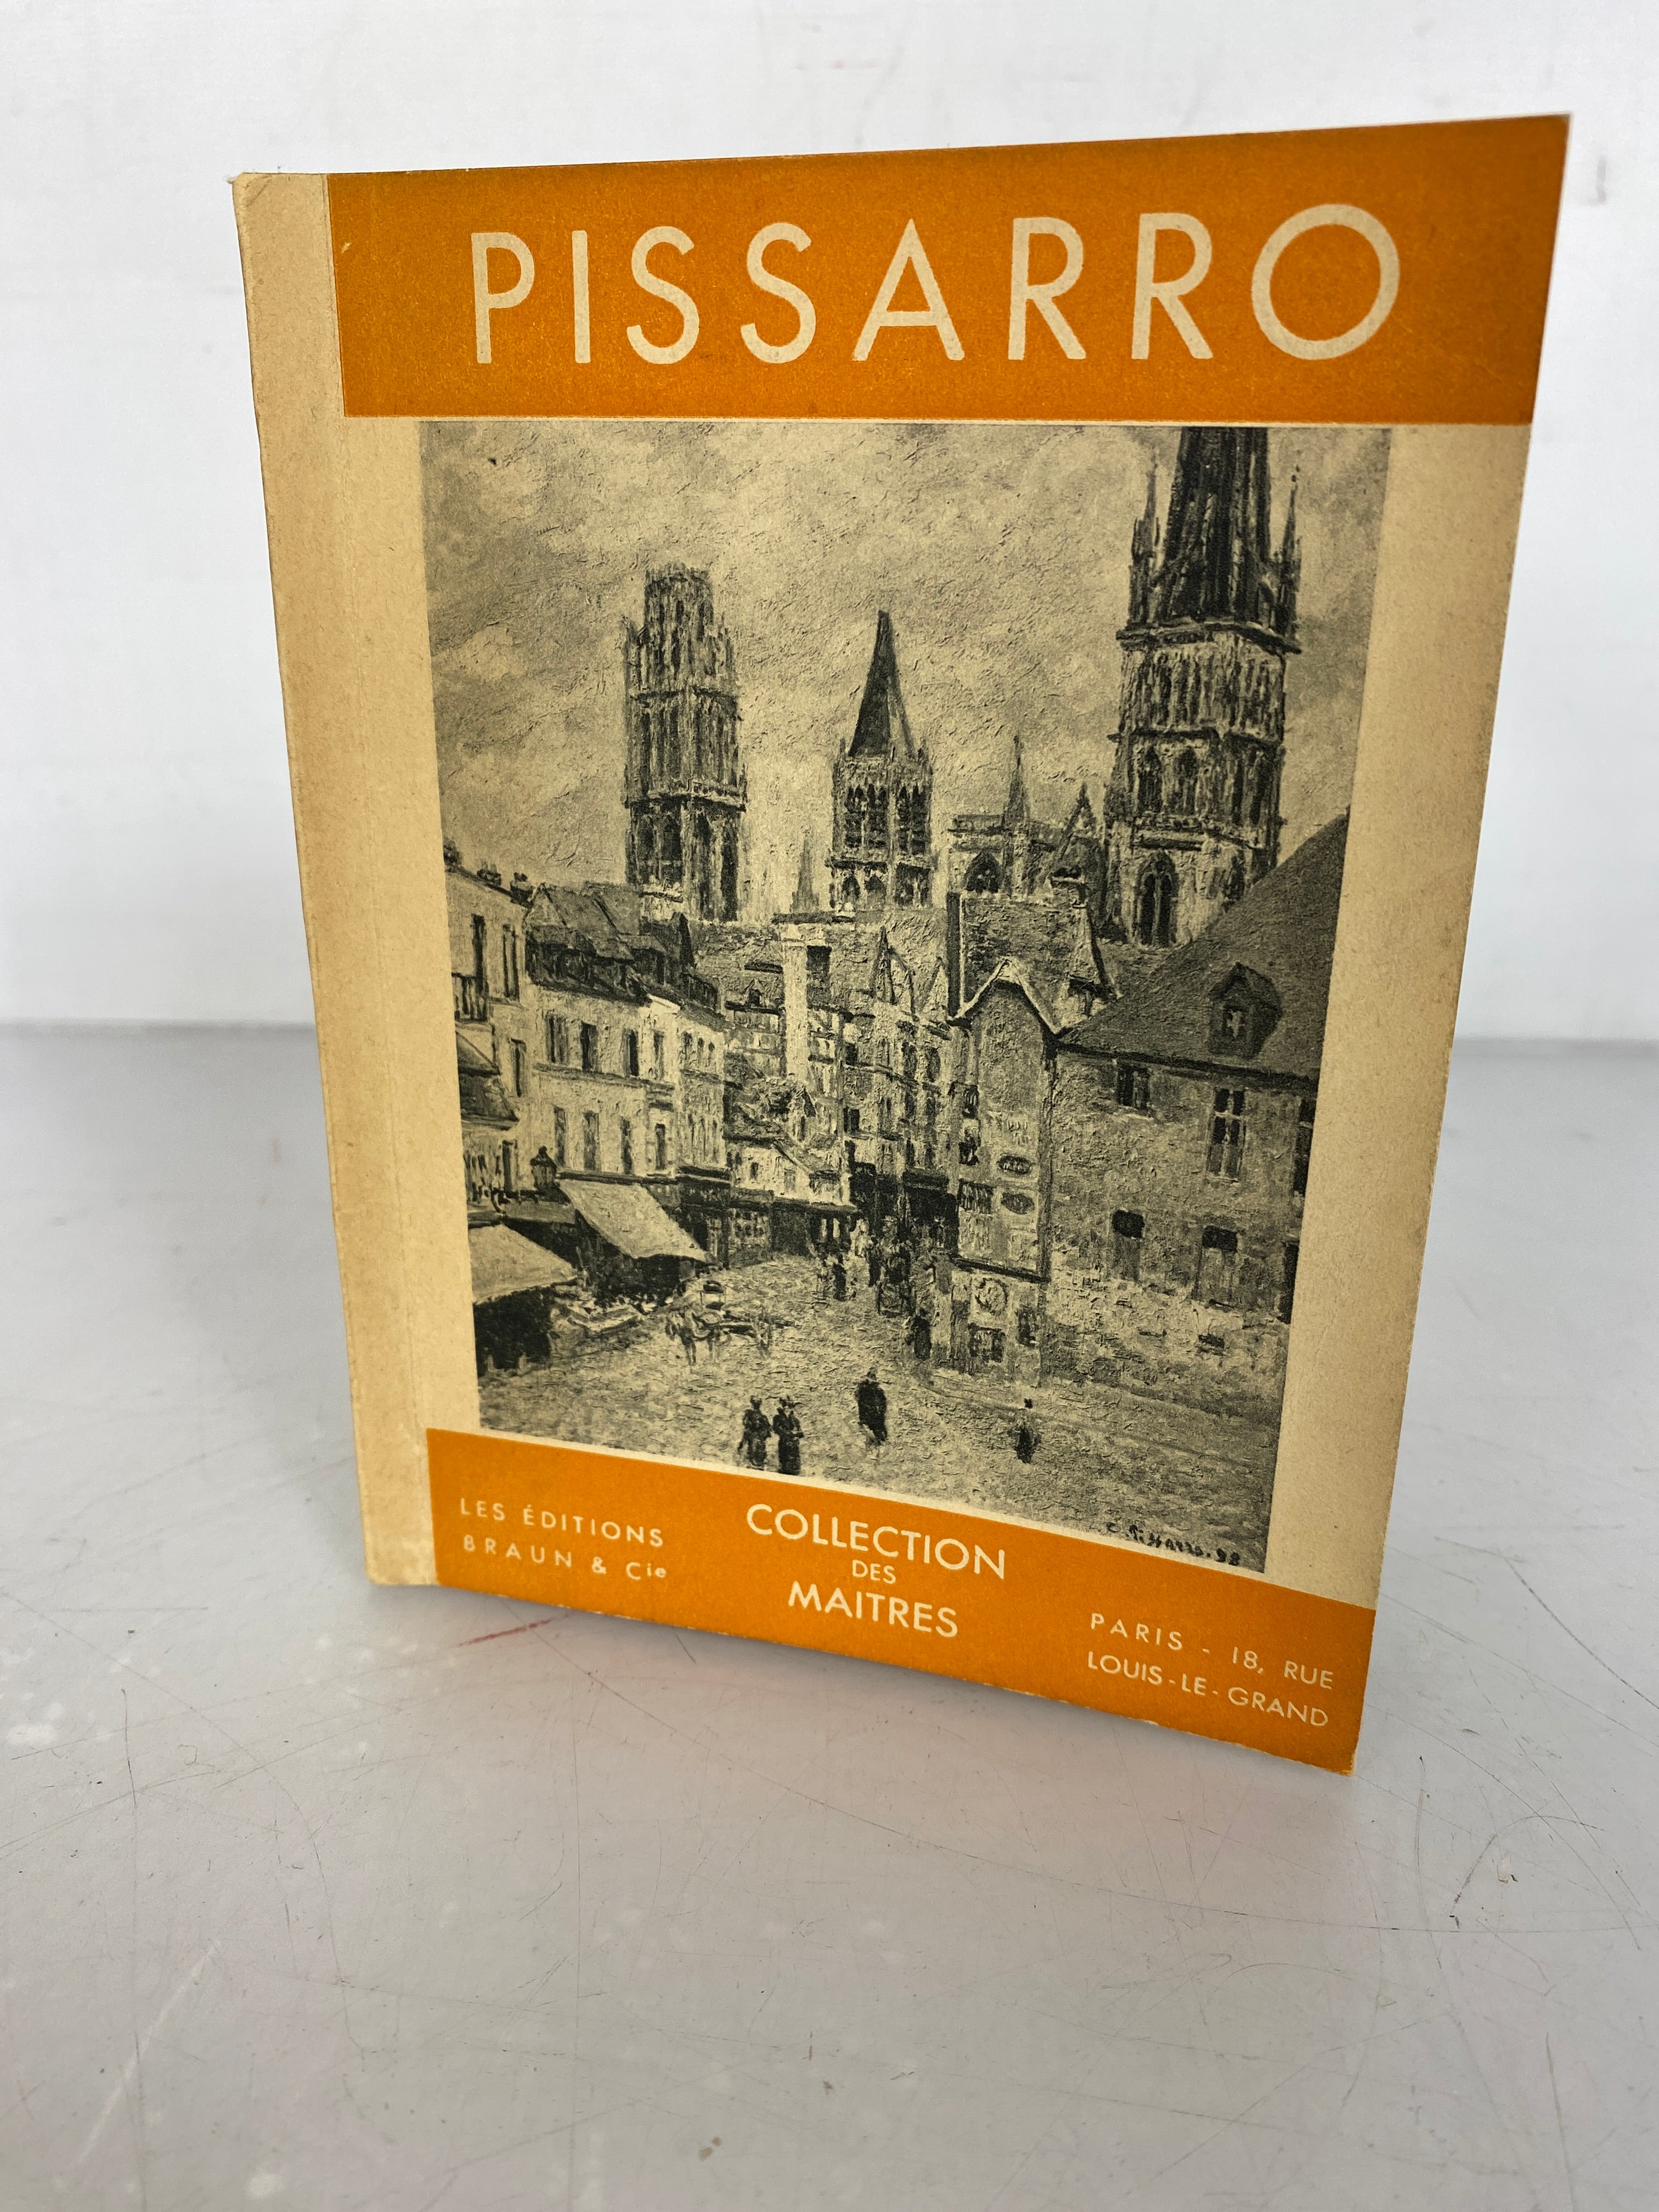 Lot of 2 Art Books Camille Pissarro (in French) and Pablo Picasso (in German) c1950-1960s SC HC